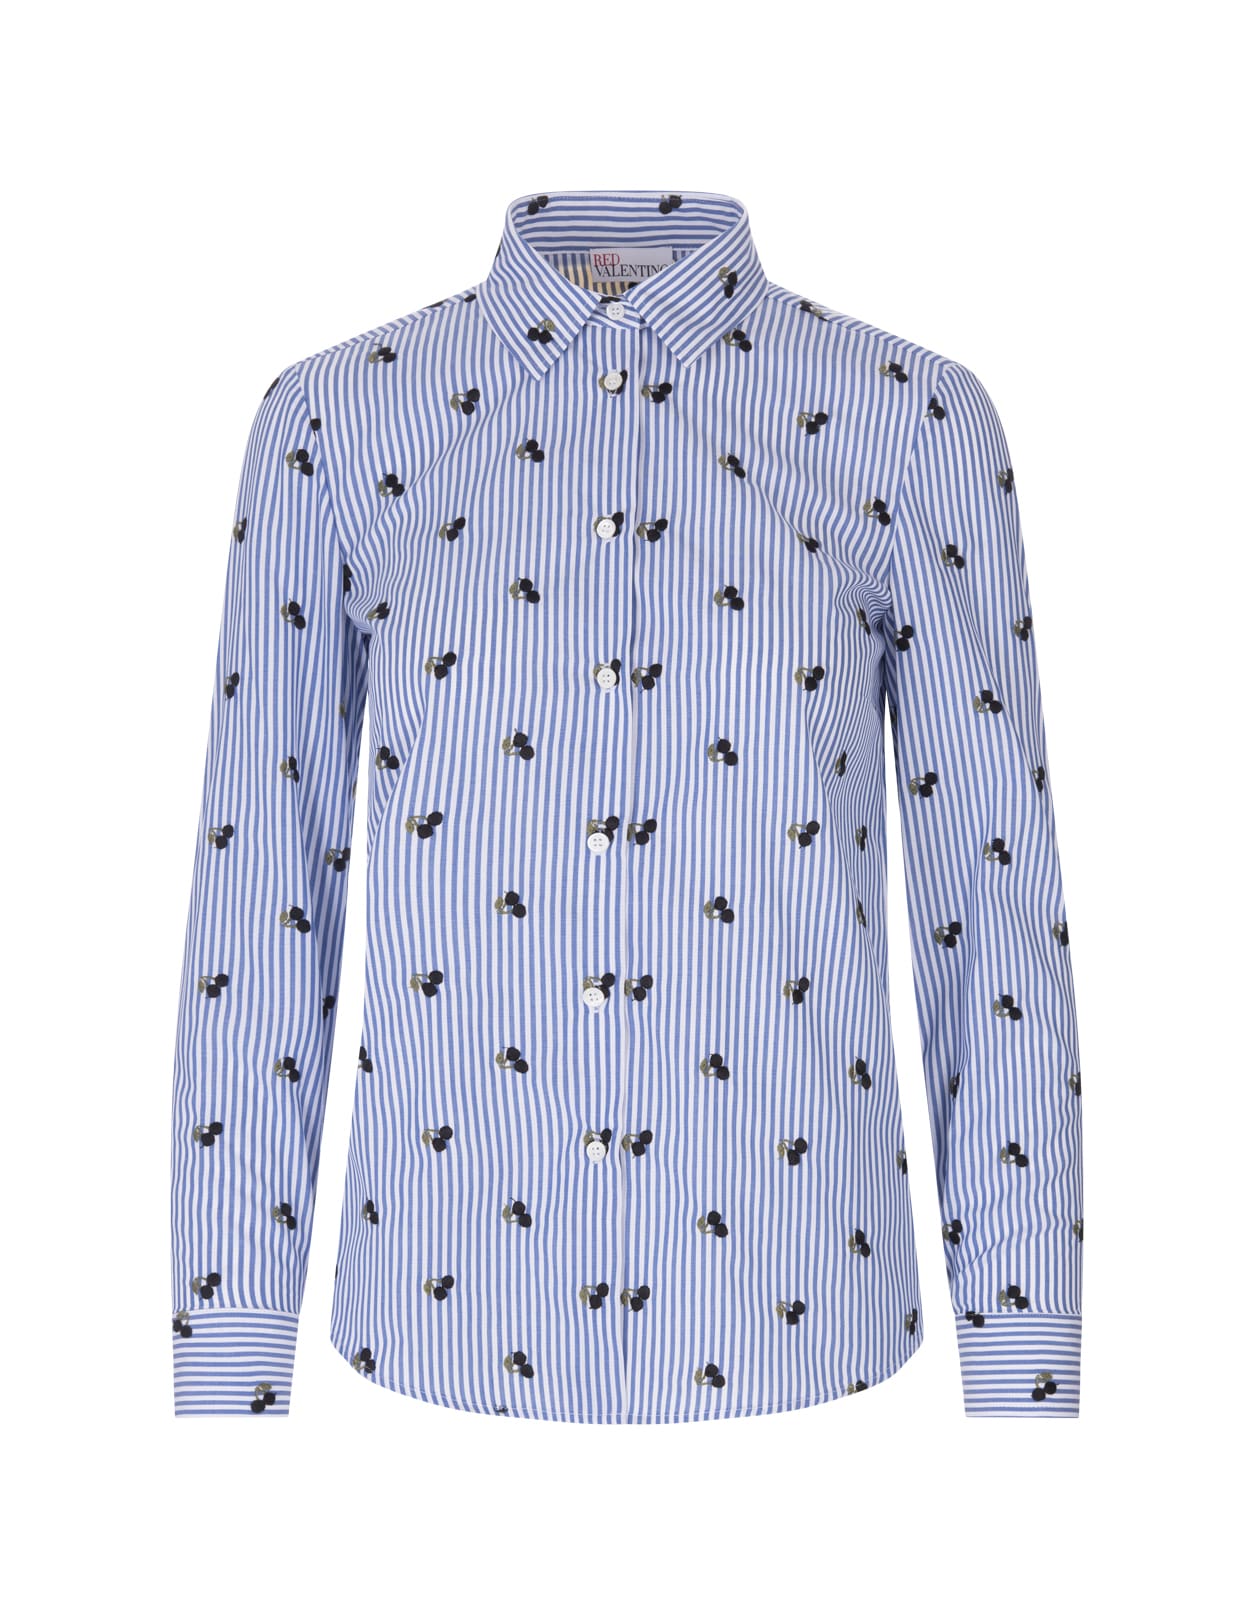 RED Valentino Woman White And Light Blue Striped Shirt With All-over Cherries